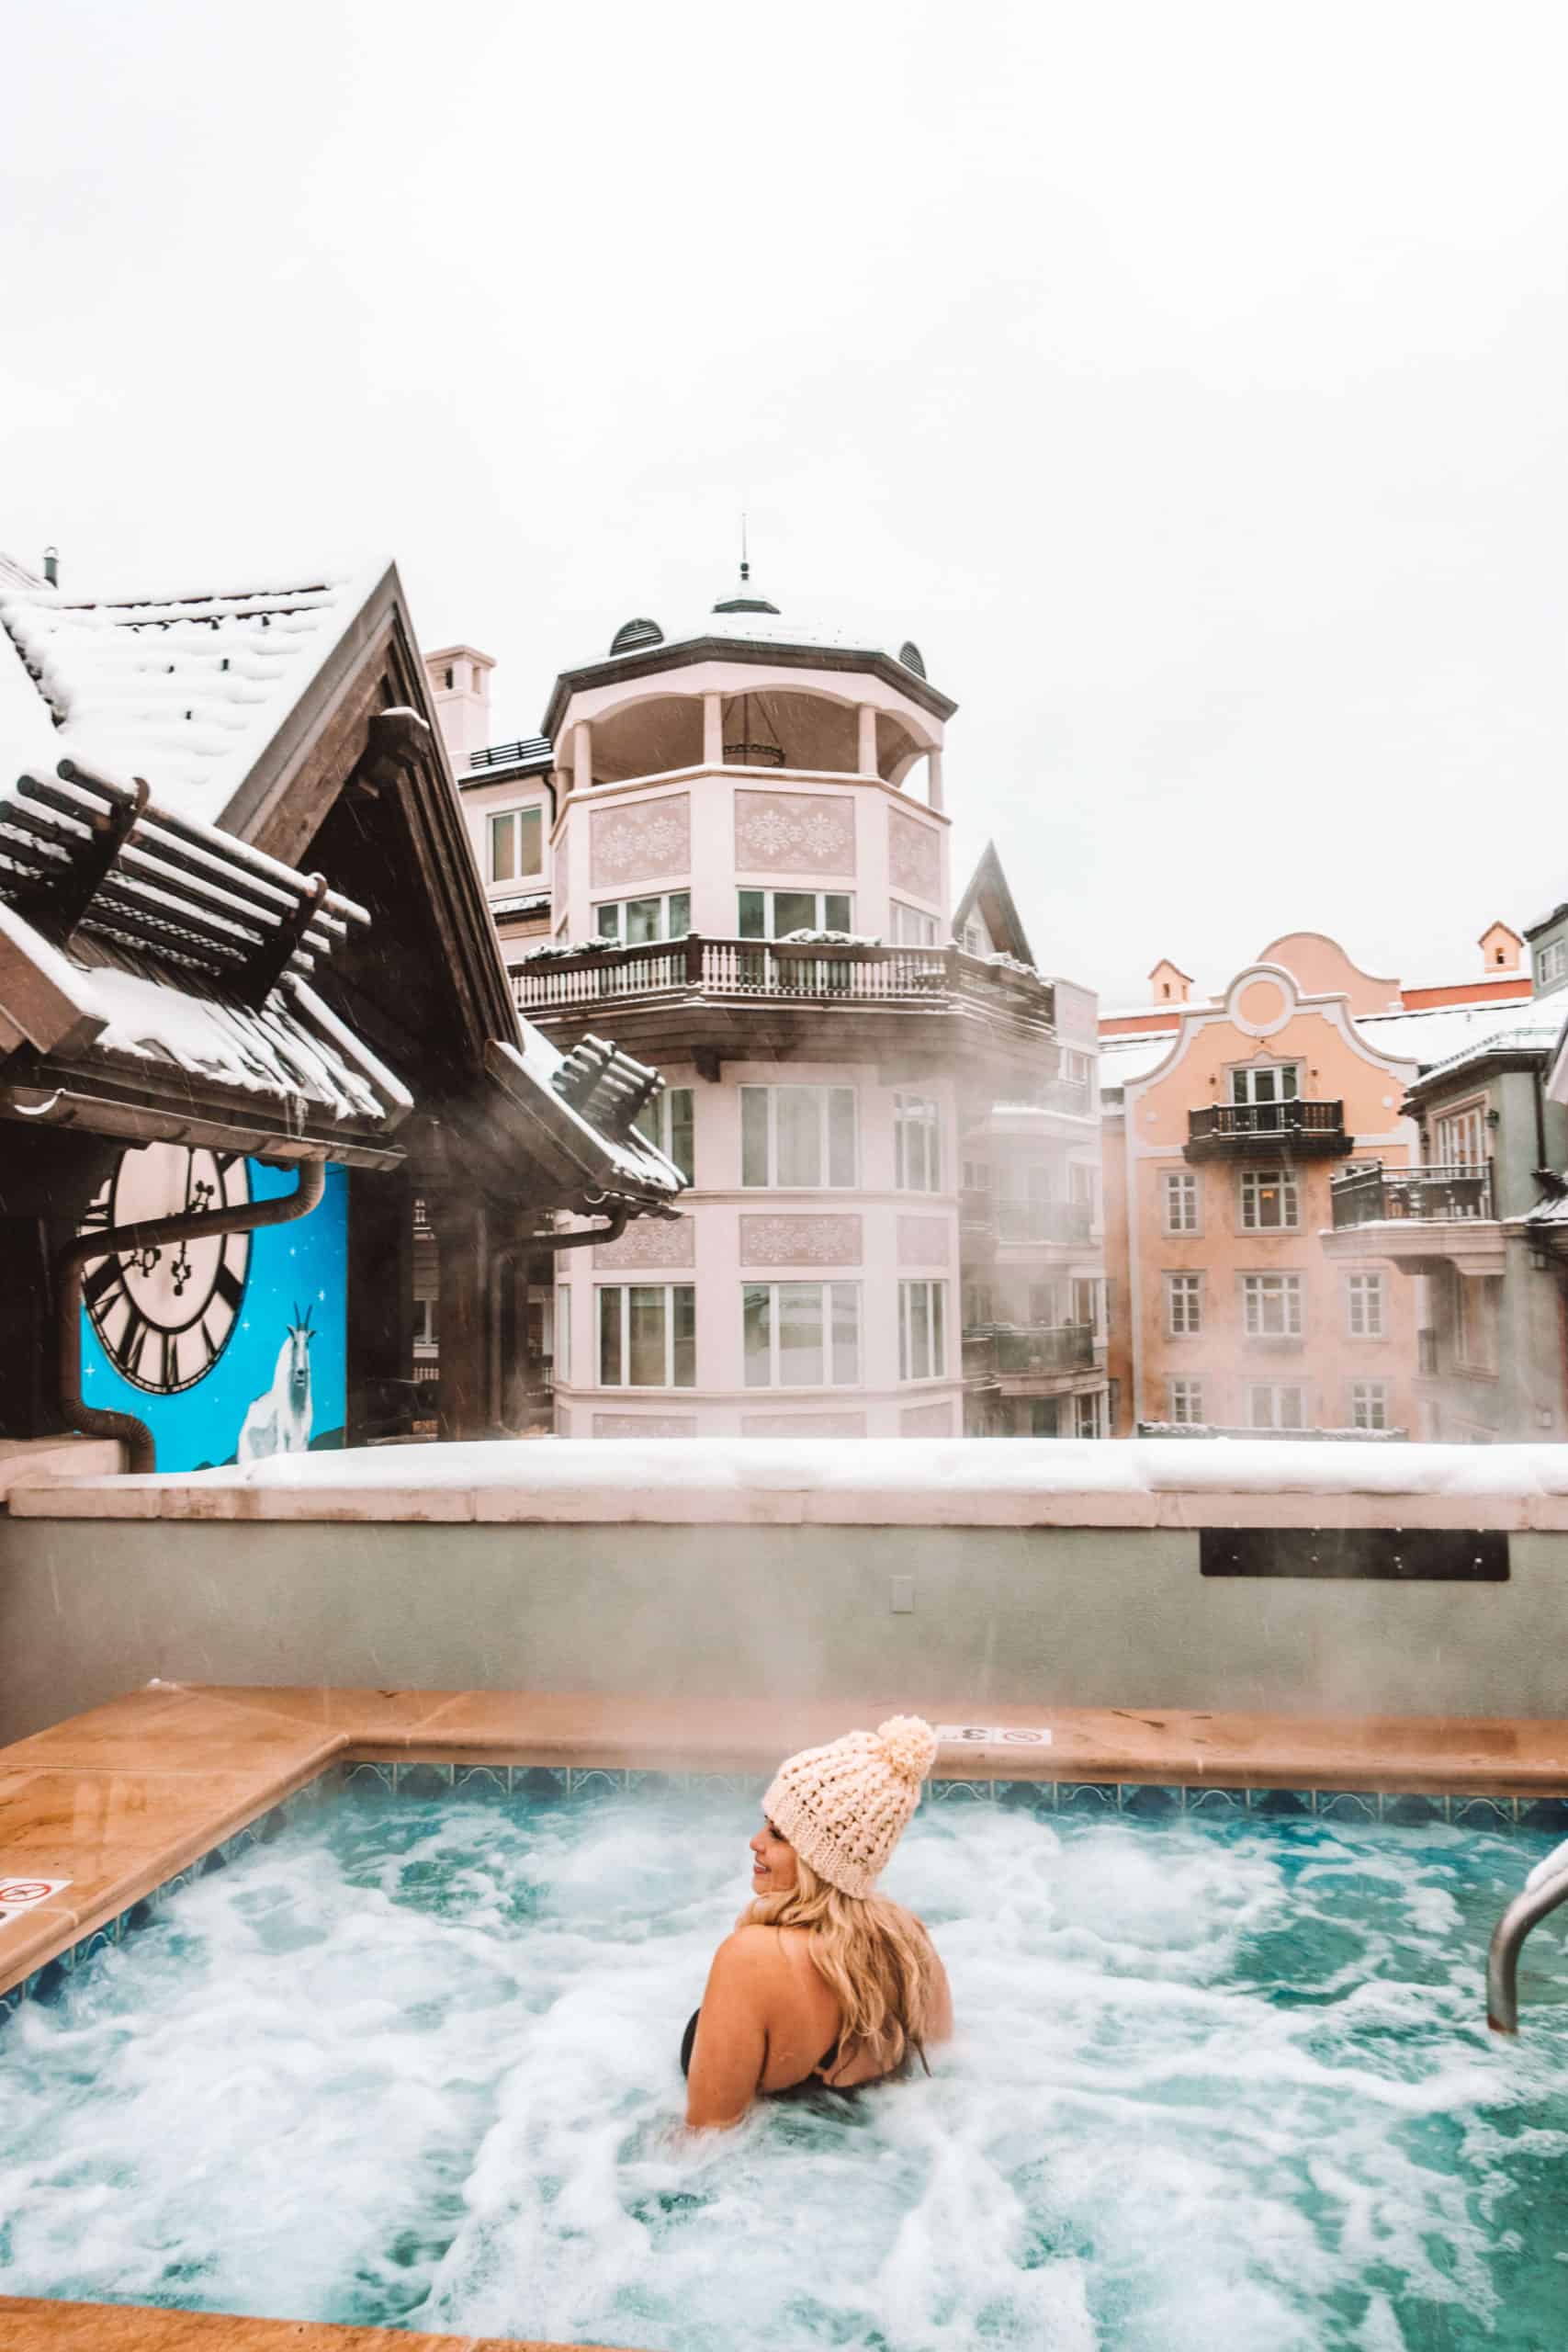 Jacuzzi at the Arrabelle hotel | The Ultimate Guide to Vail, Colorado